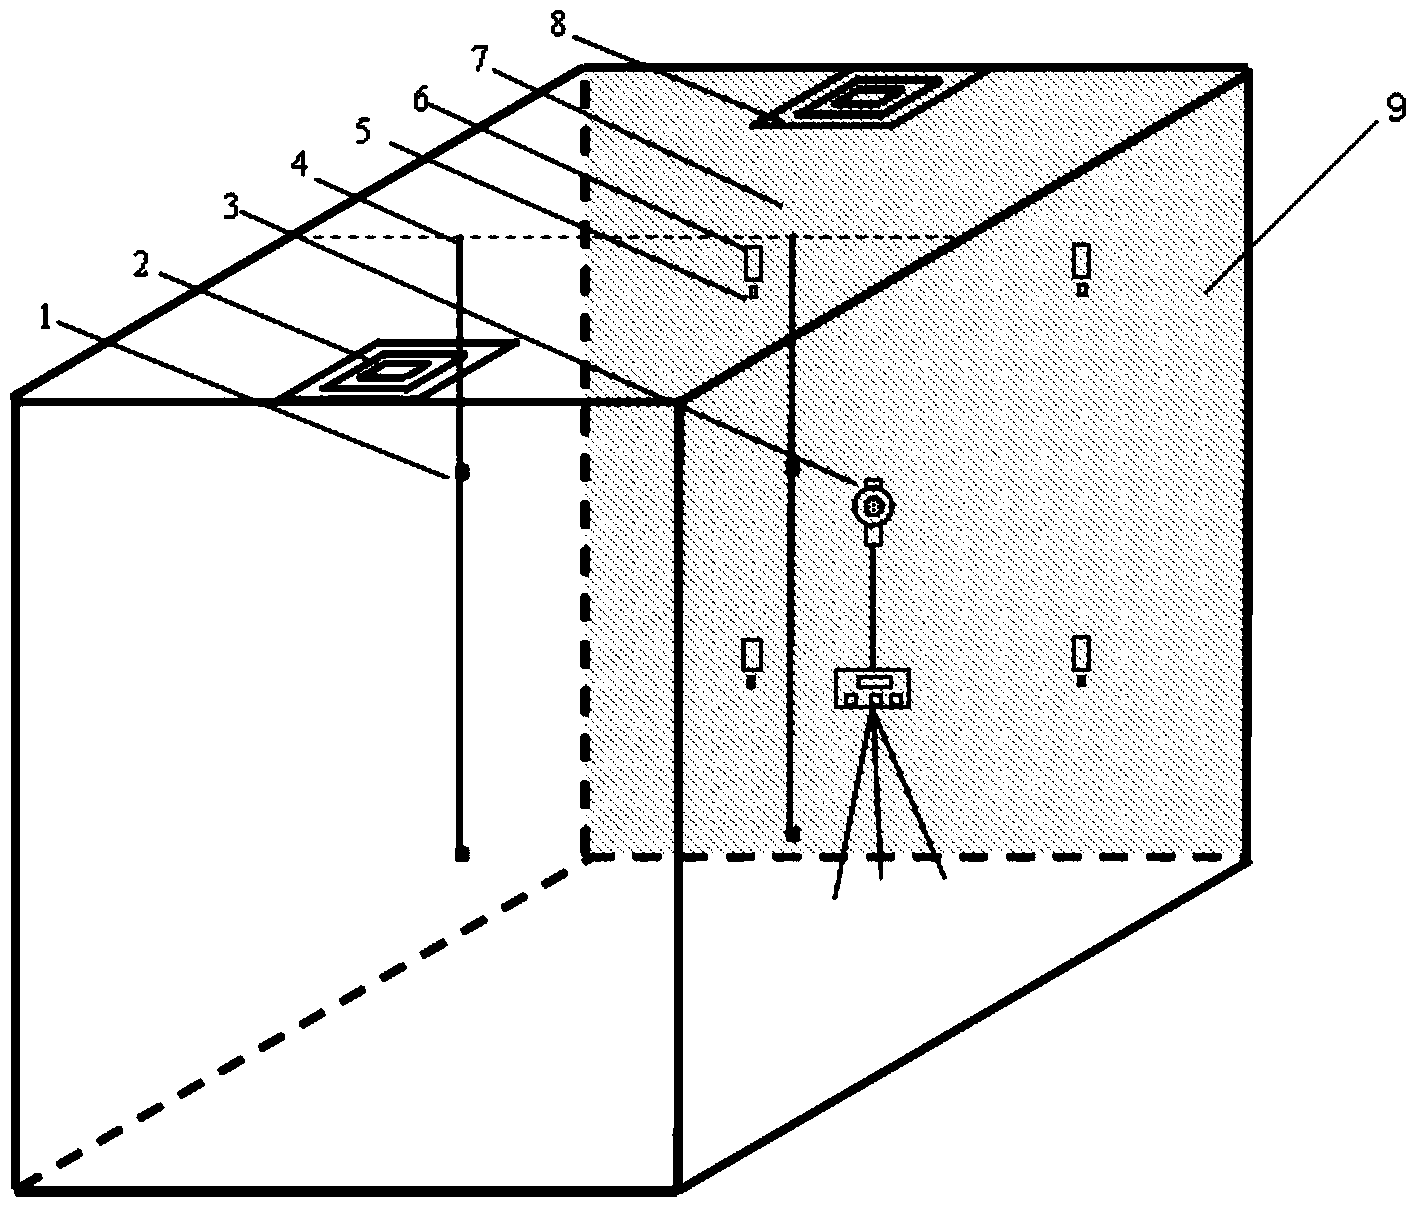 Measurement method for separation of convection heat and radiant heat for wall surface